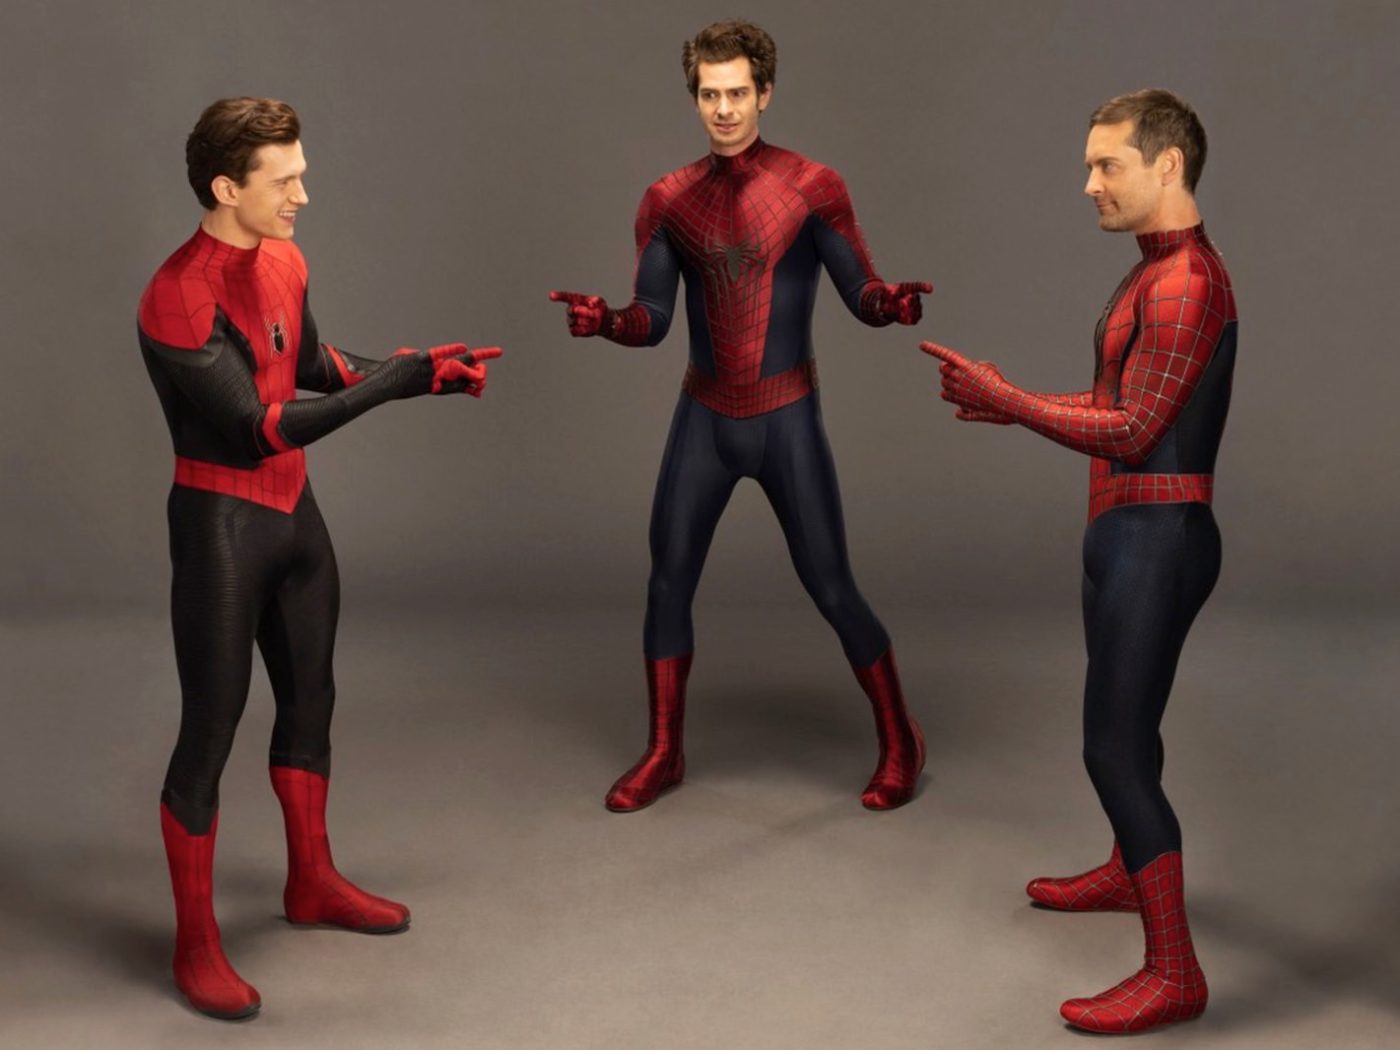 Spider-Man: No Way Home casting rumors are out of hand - Polygon